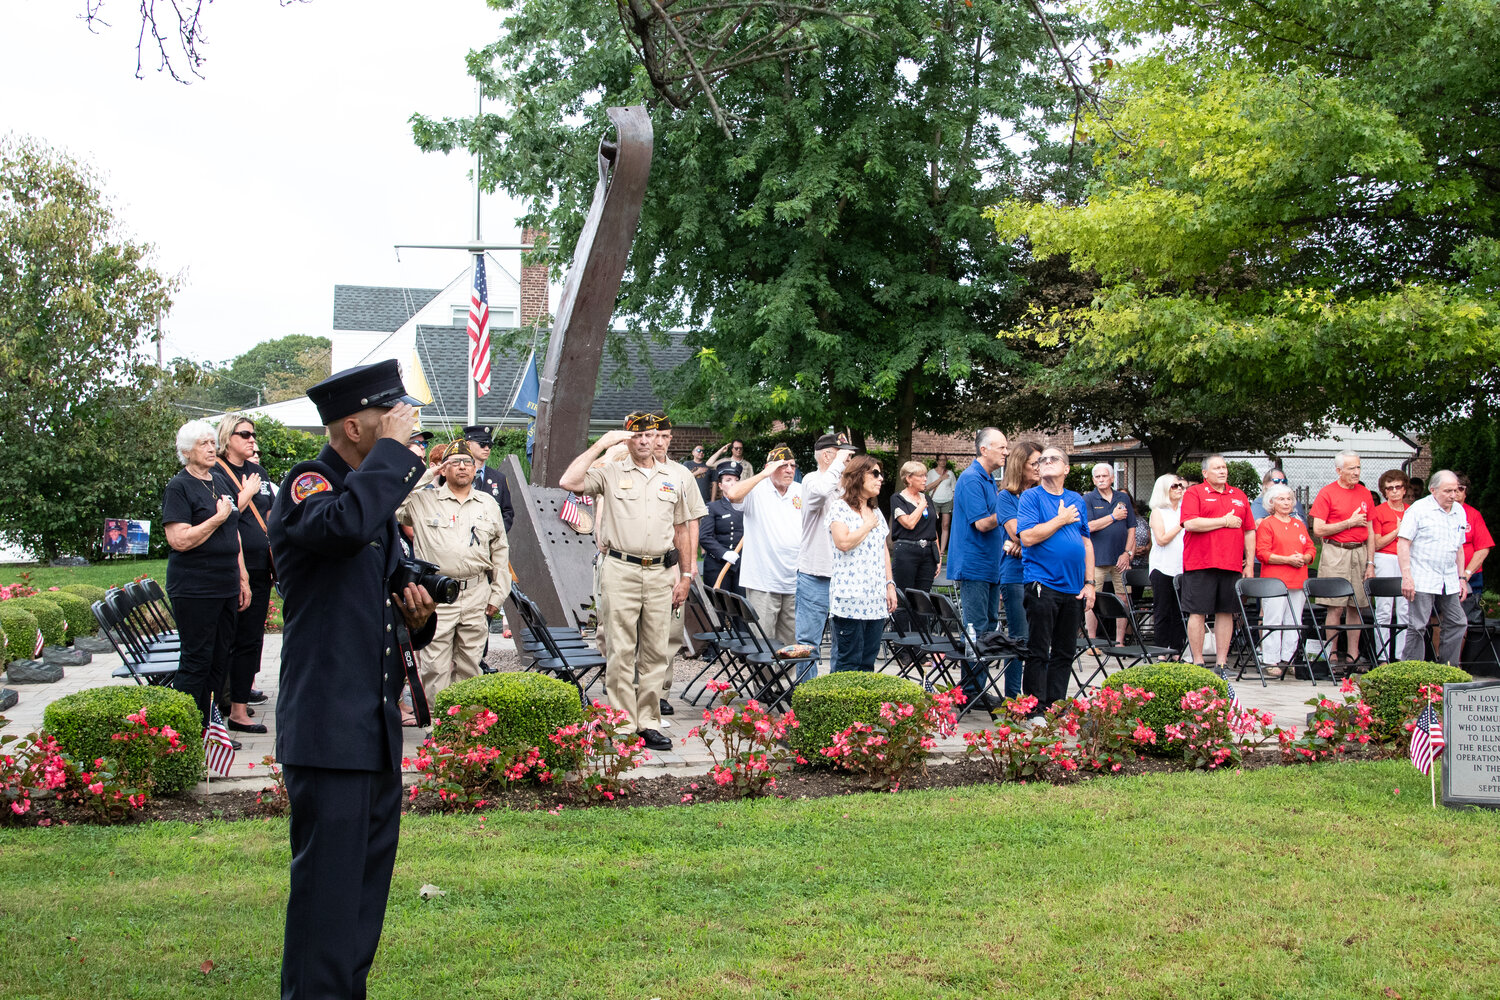 Neighbors paid their respects at the remembrance service last Sunday.